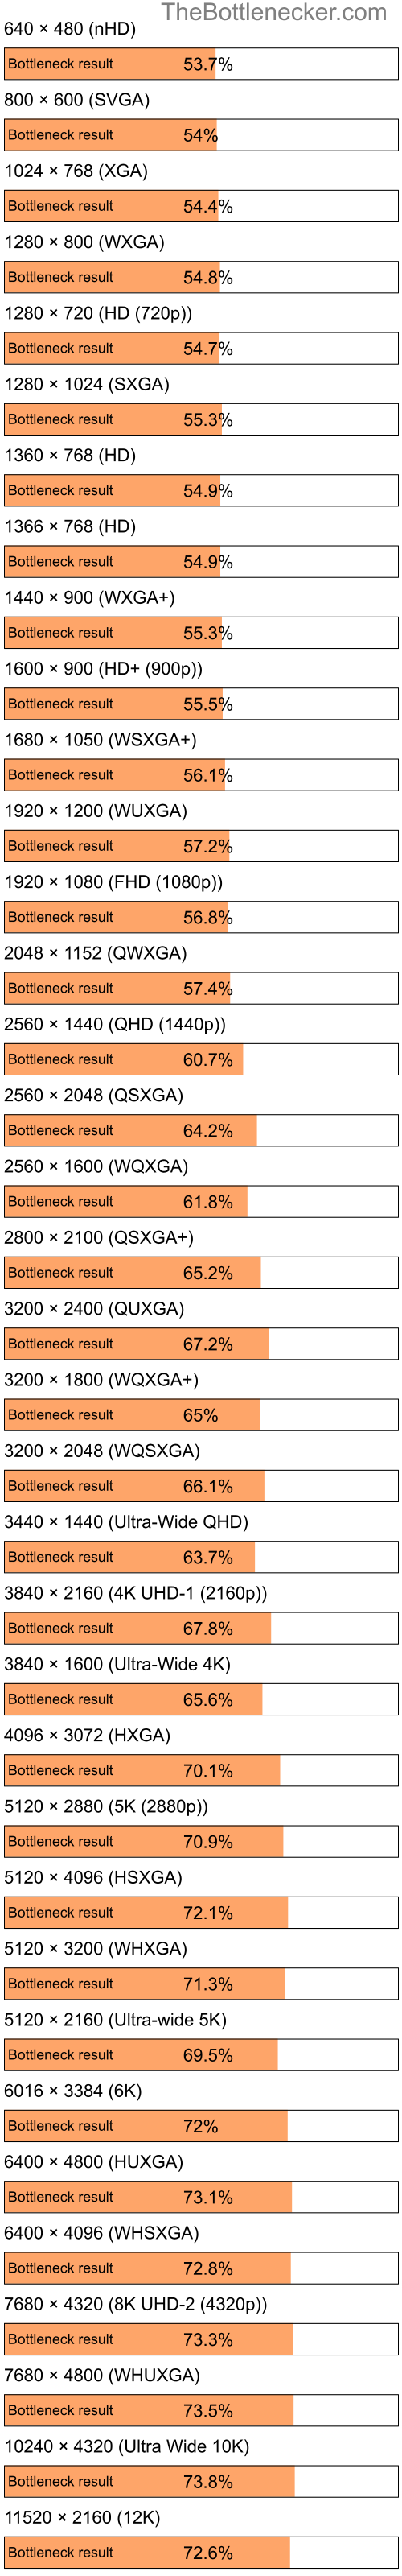 Bottleneck results by resolution for Intel Celeron and AMD Mobility Radeon 4100 in Processor Intense Tasks